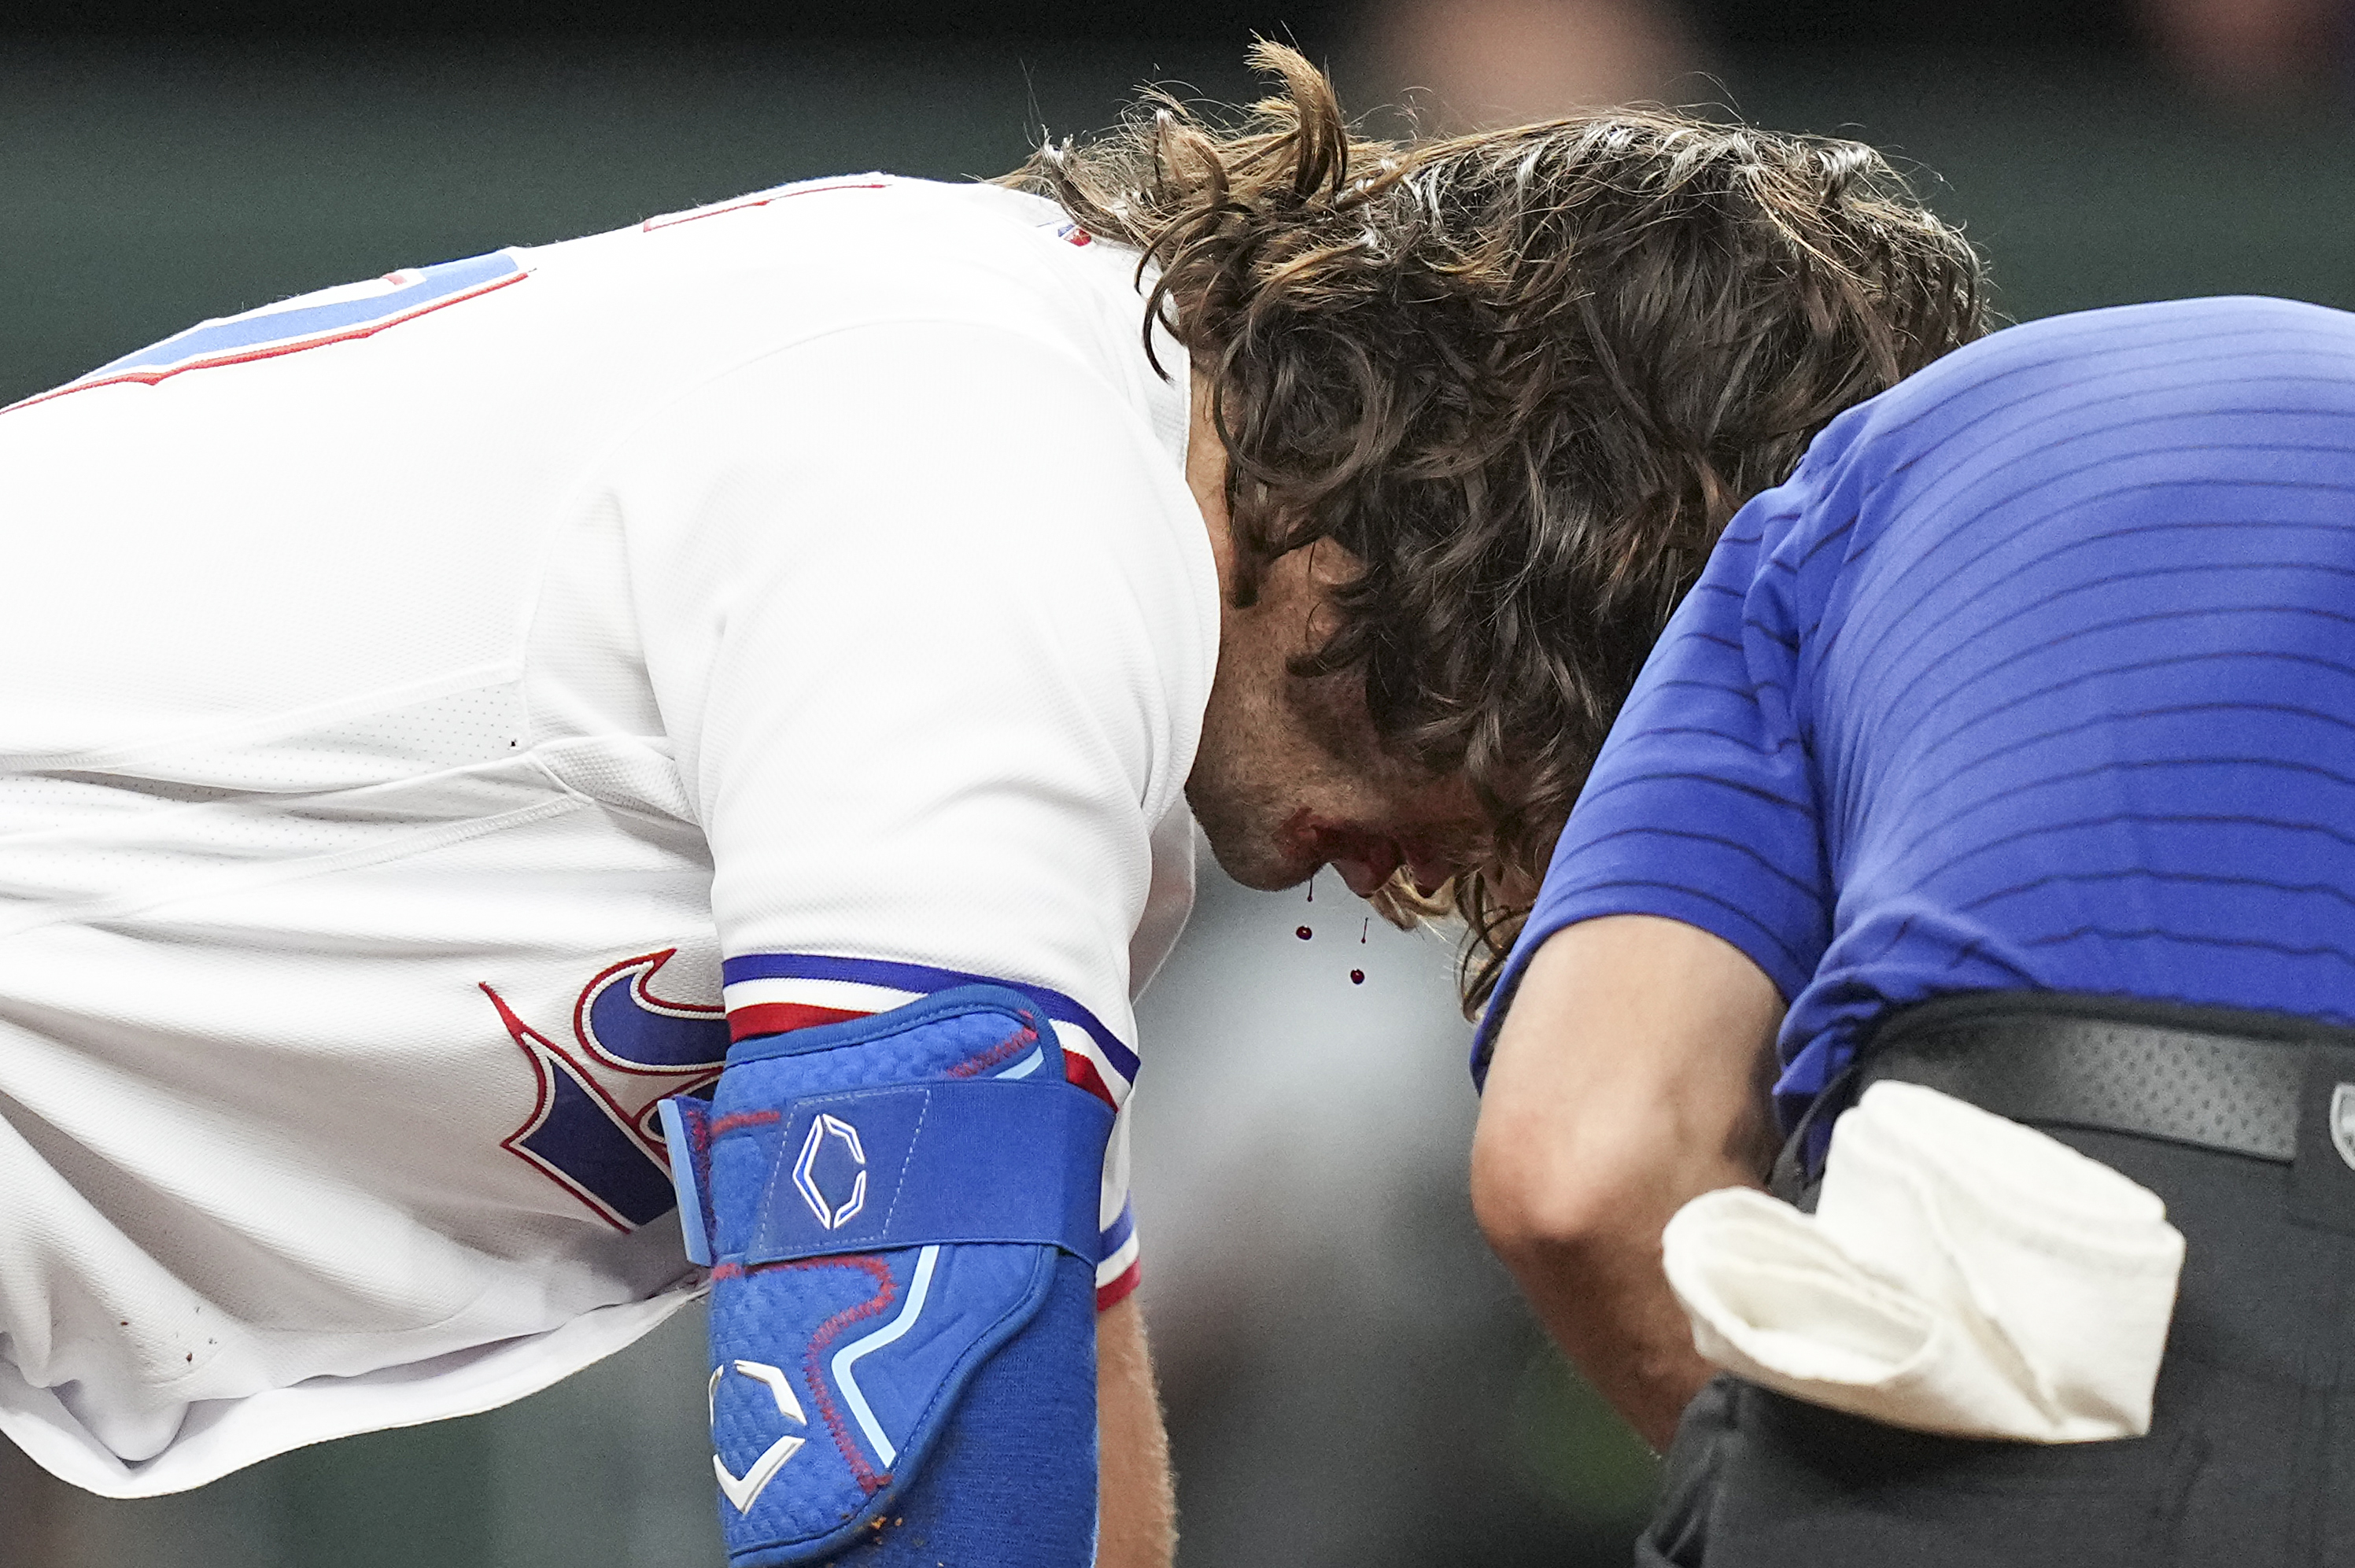 Rangers' Josh Smith got stitches, some swelling after pitch to face